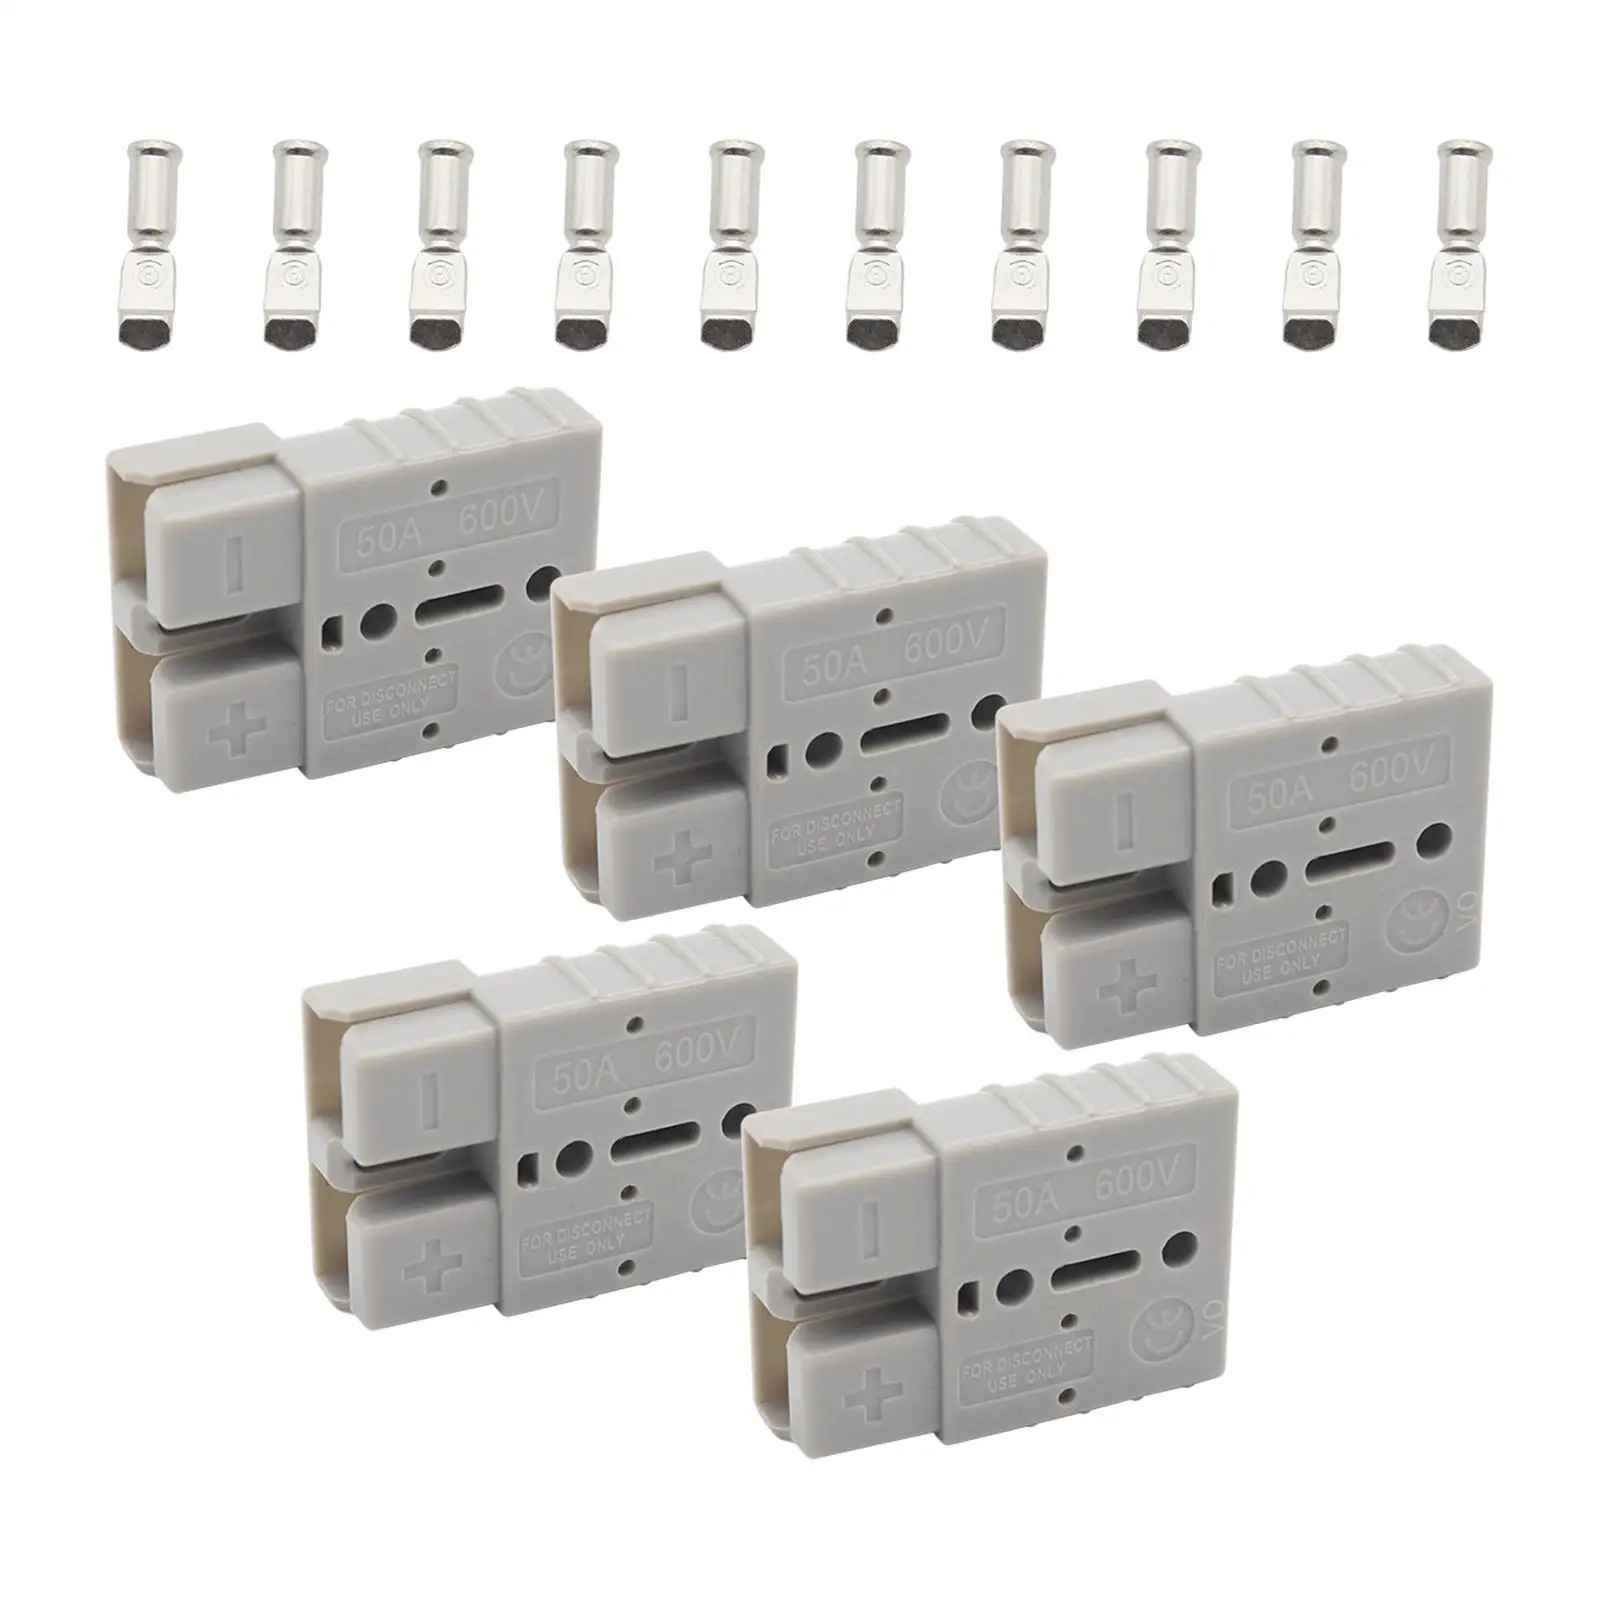 

5x Plug Connectors, DC Power Connectors, High Performance, Quick Connection Power Tool Battery Connector